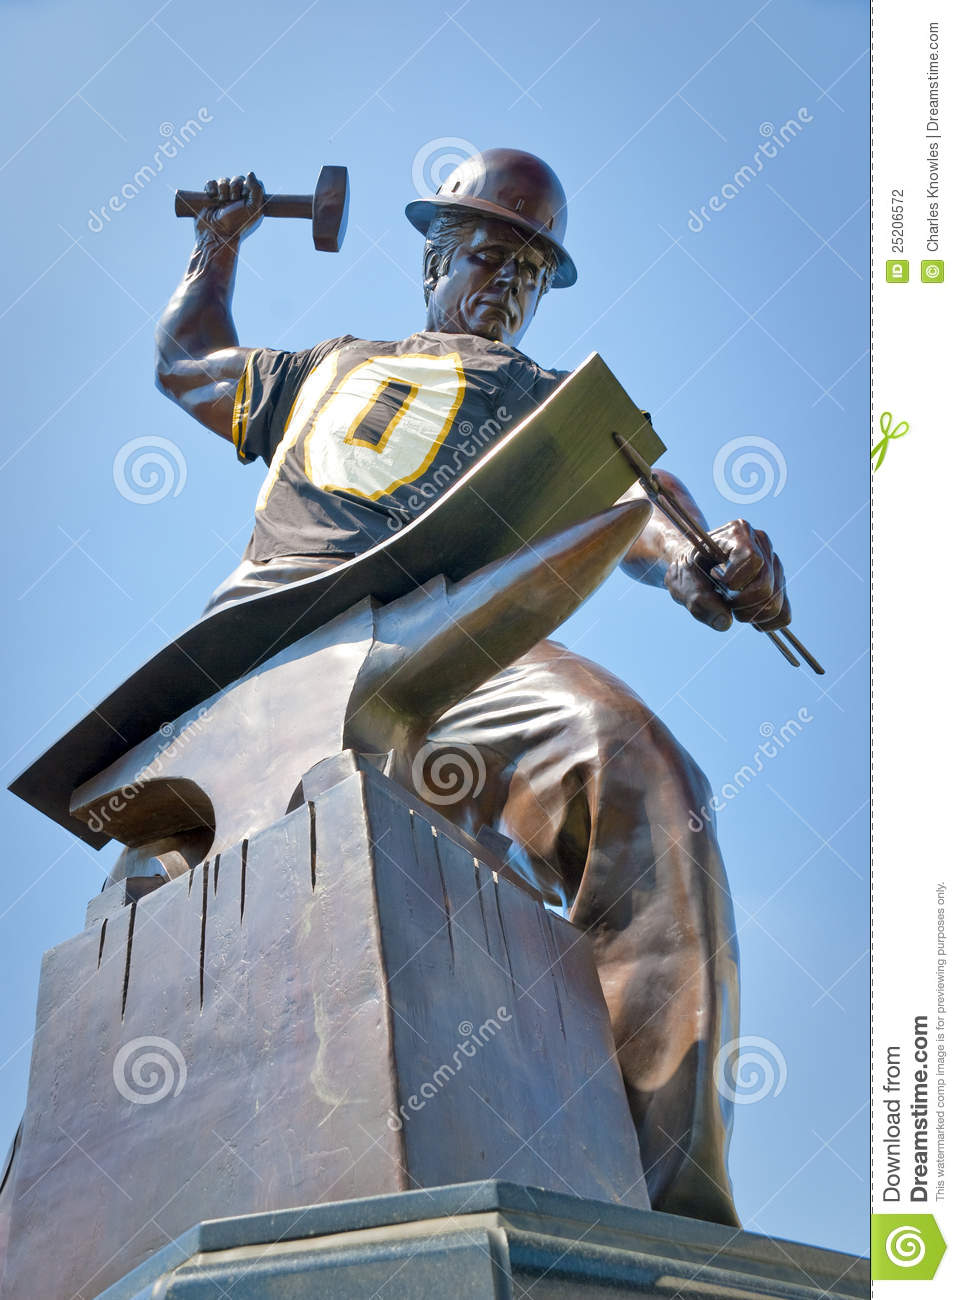 Satue Of A Steel Worker Against A Blue Sky Stock Photography   Image